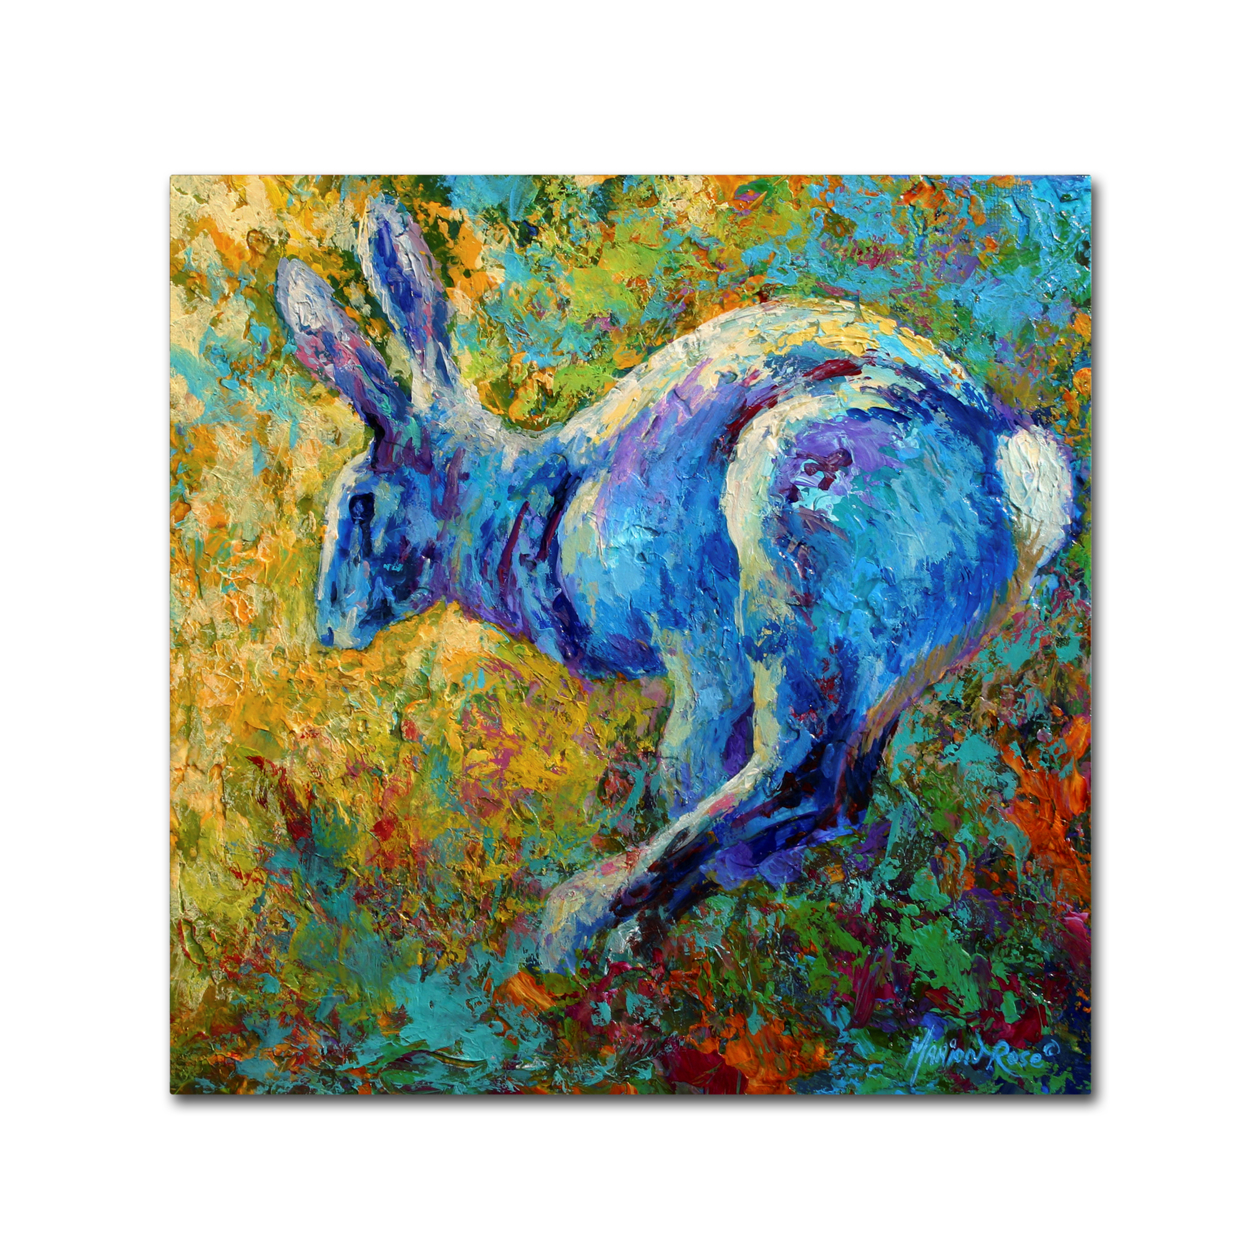 Marion Rose 'Hare' Ready To Hang Canvas Art 35 X 35 Inches Made In USA